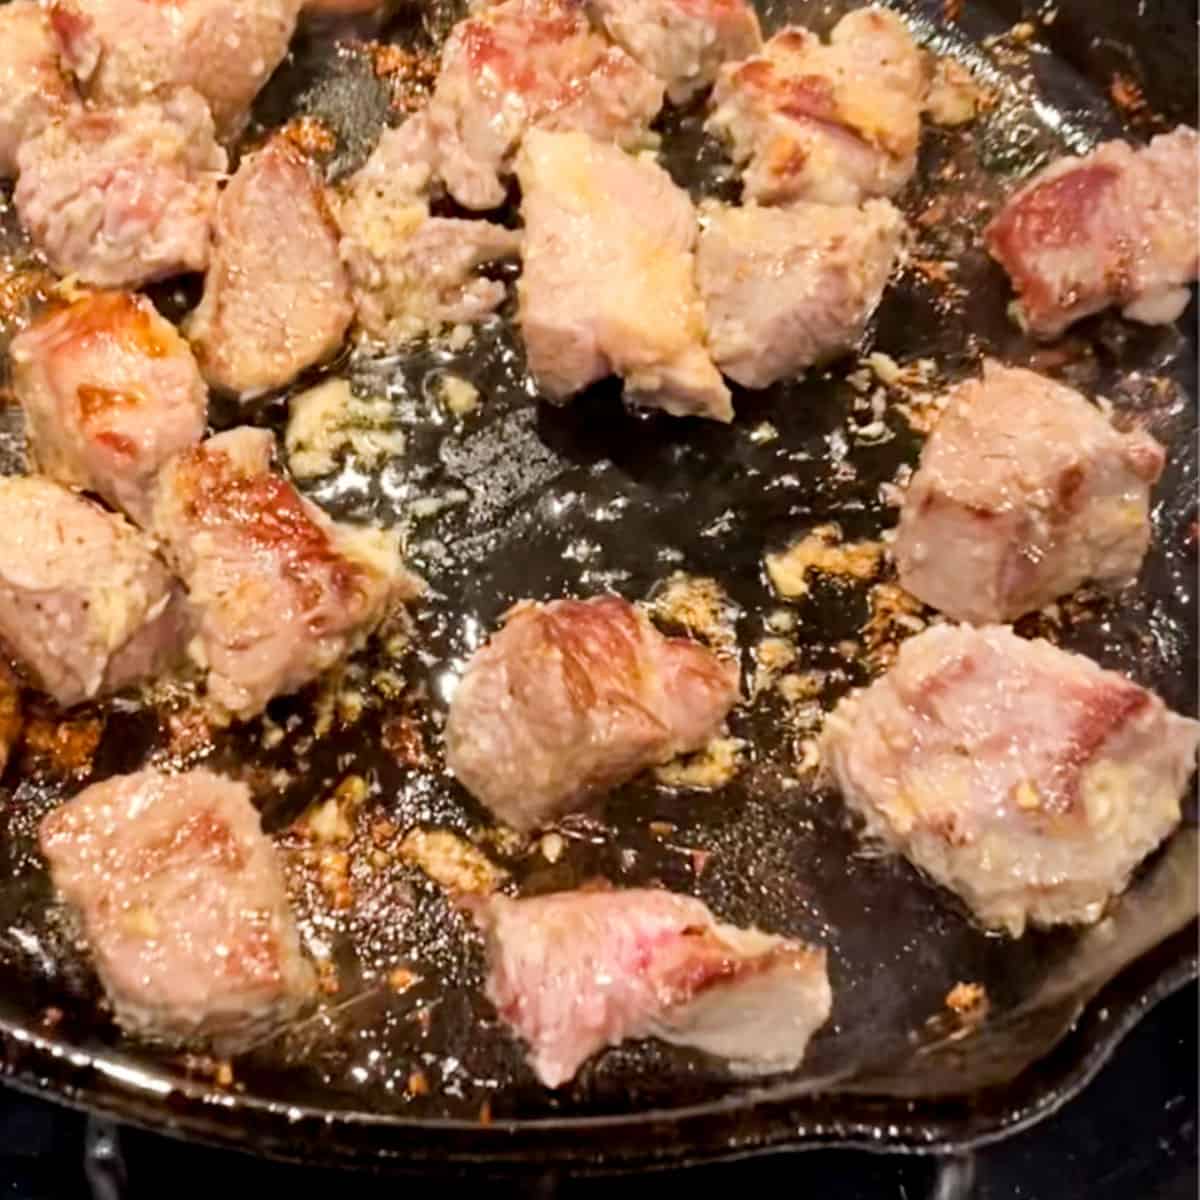 Cubes of lamb browning in a cast iron skillet